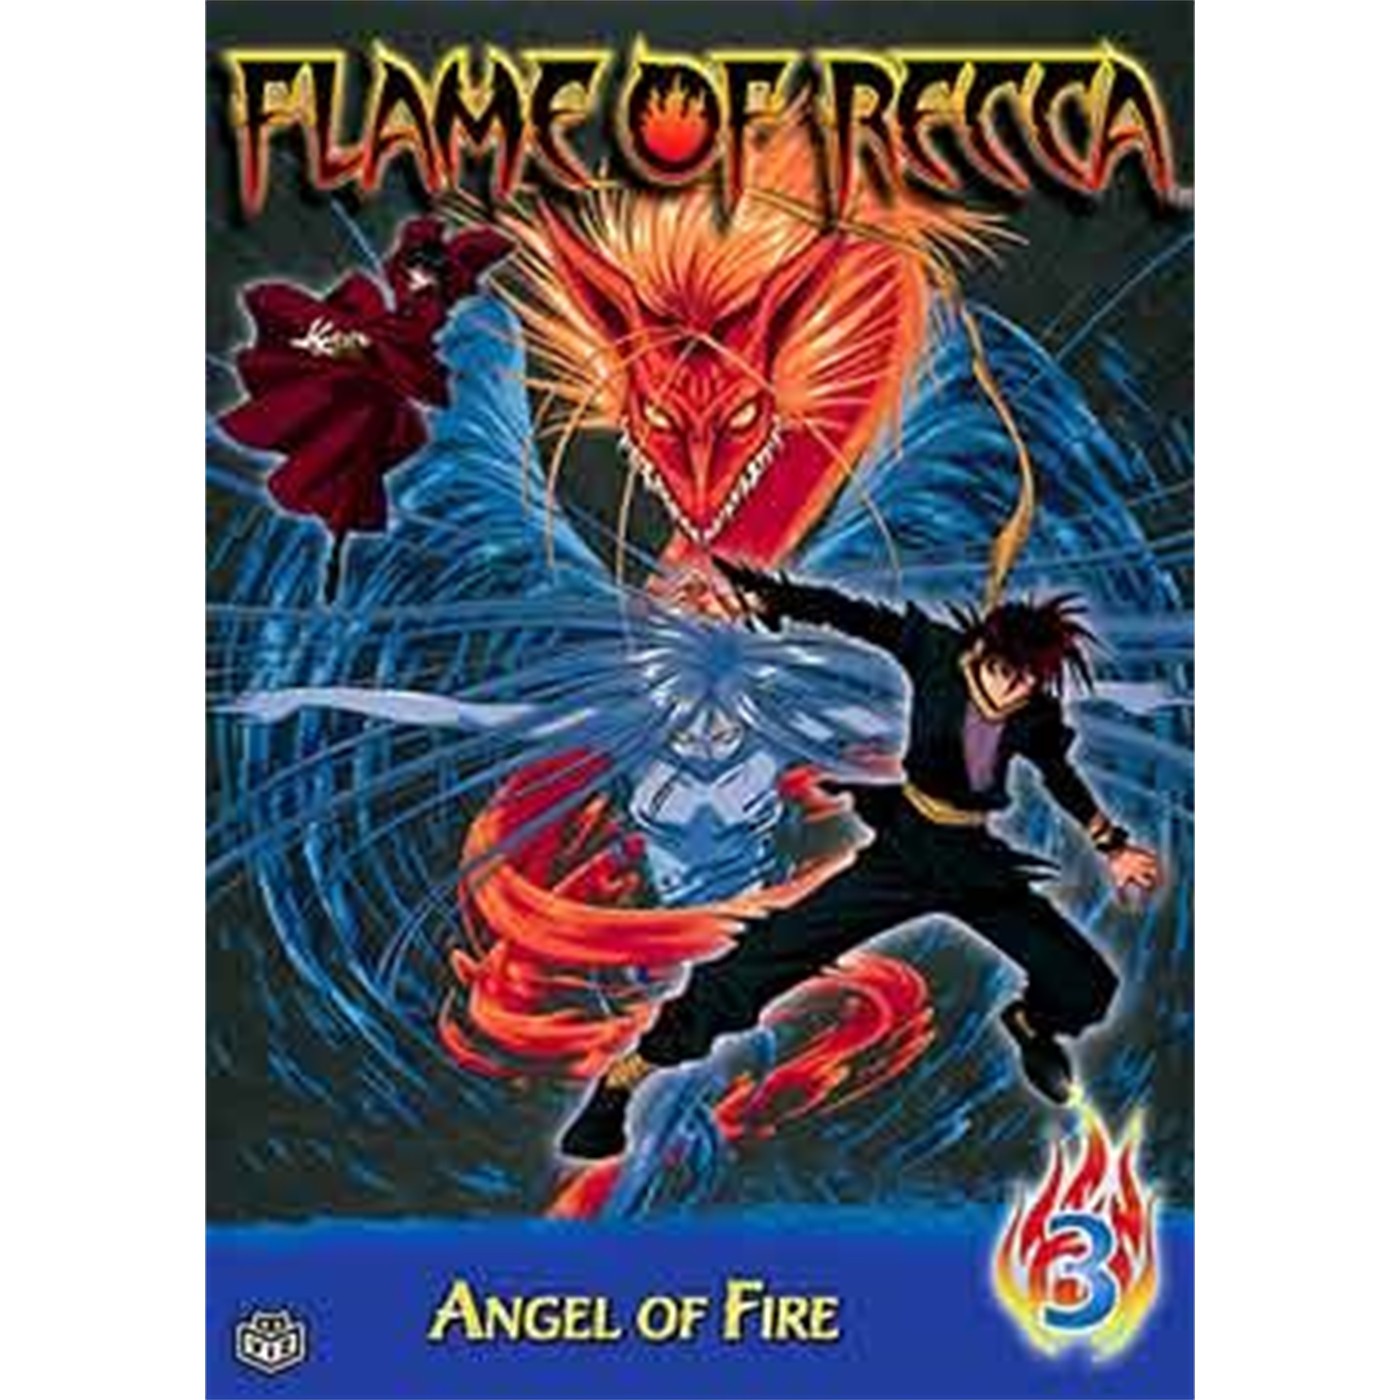 Flame of Recca, Vol. 3: Angel of Fire (DVD)